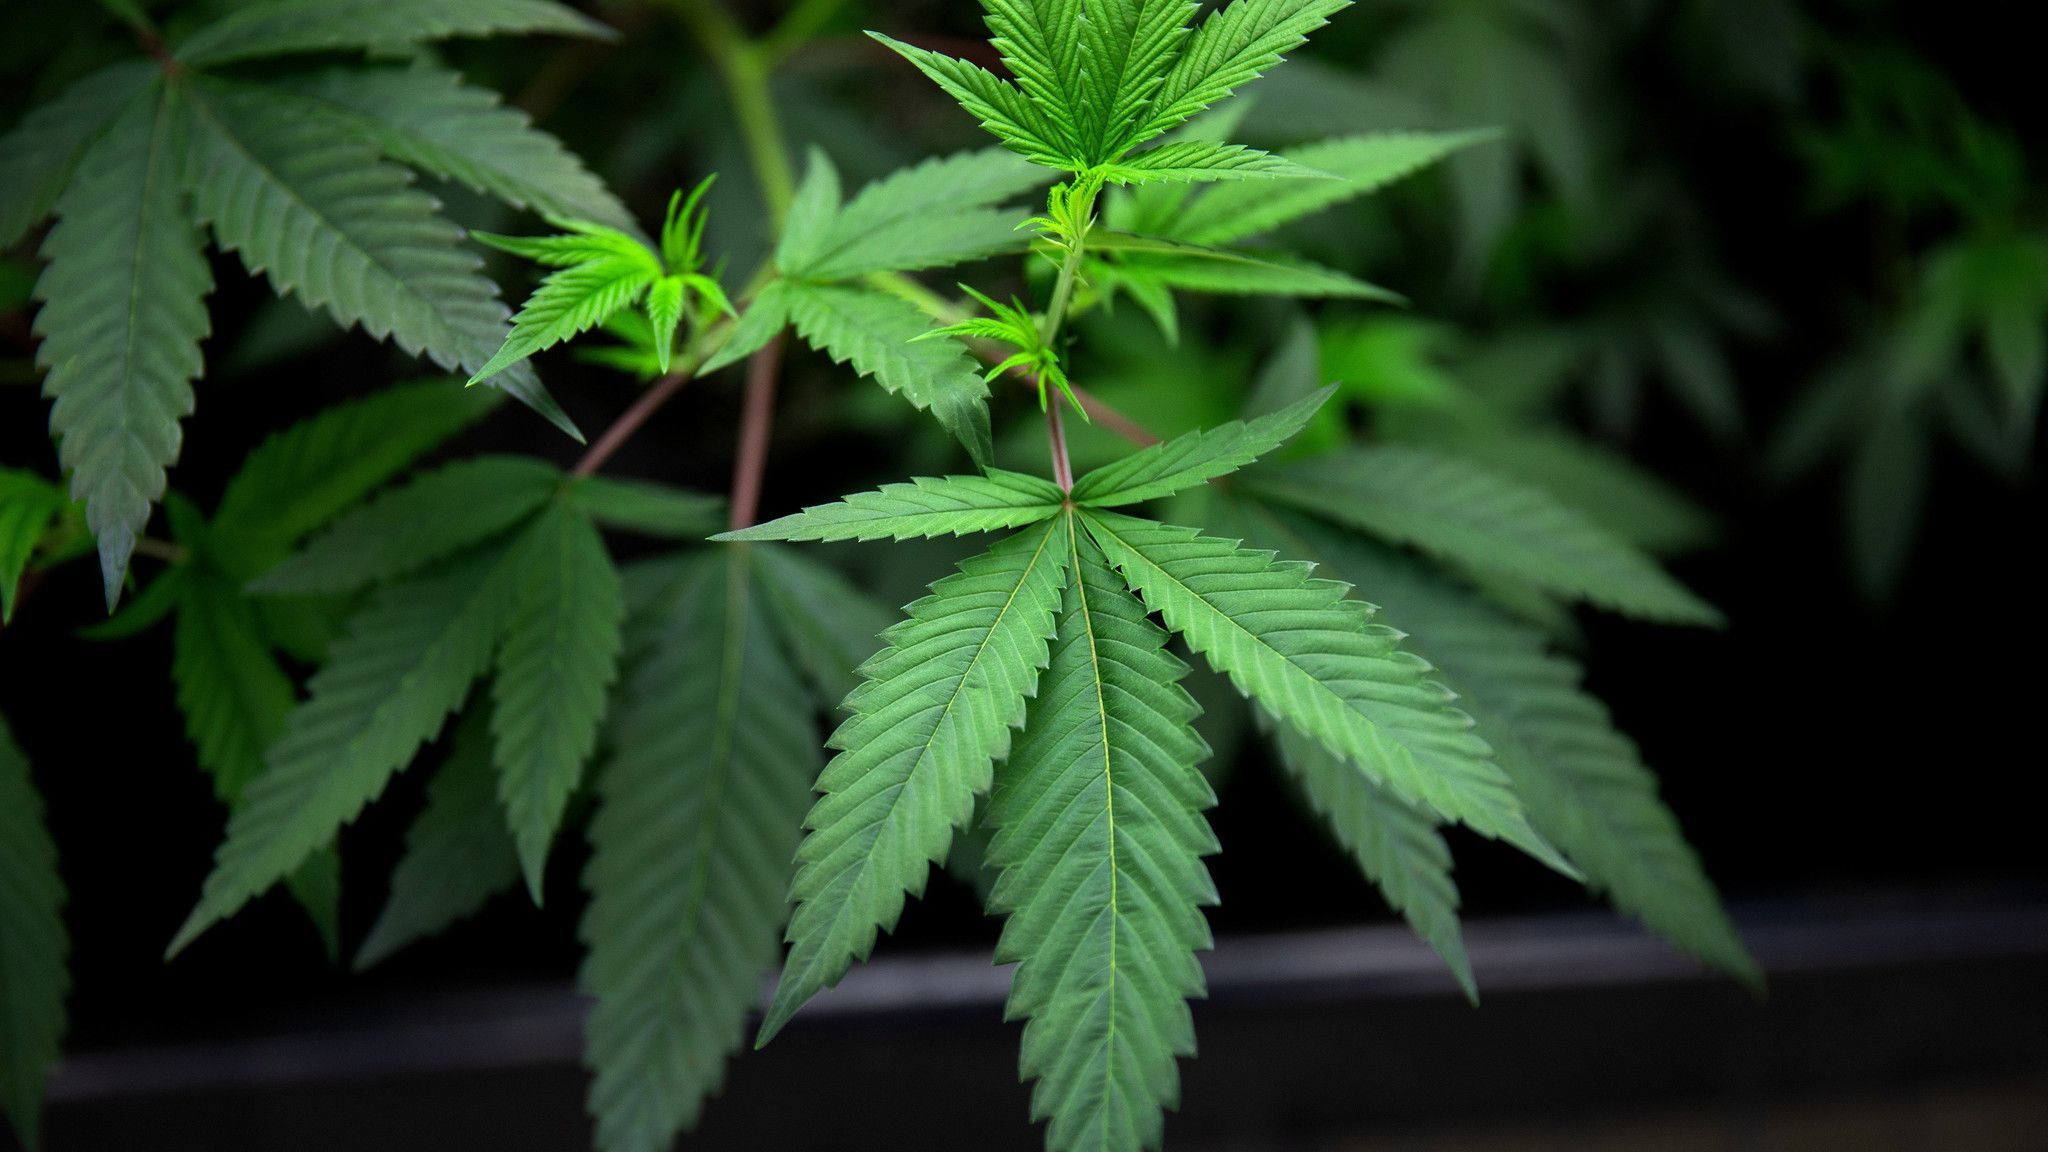 Marijuana Legalization Proposed In PaState House - News, Sports, Jobs -  Post Journal